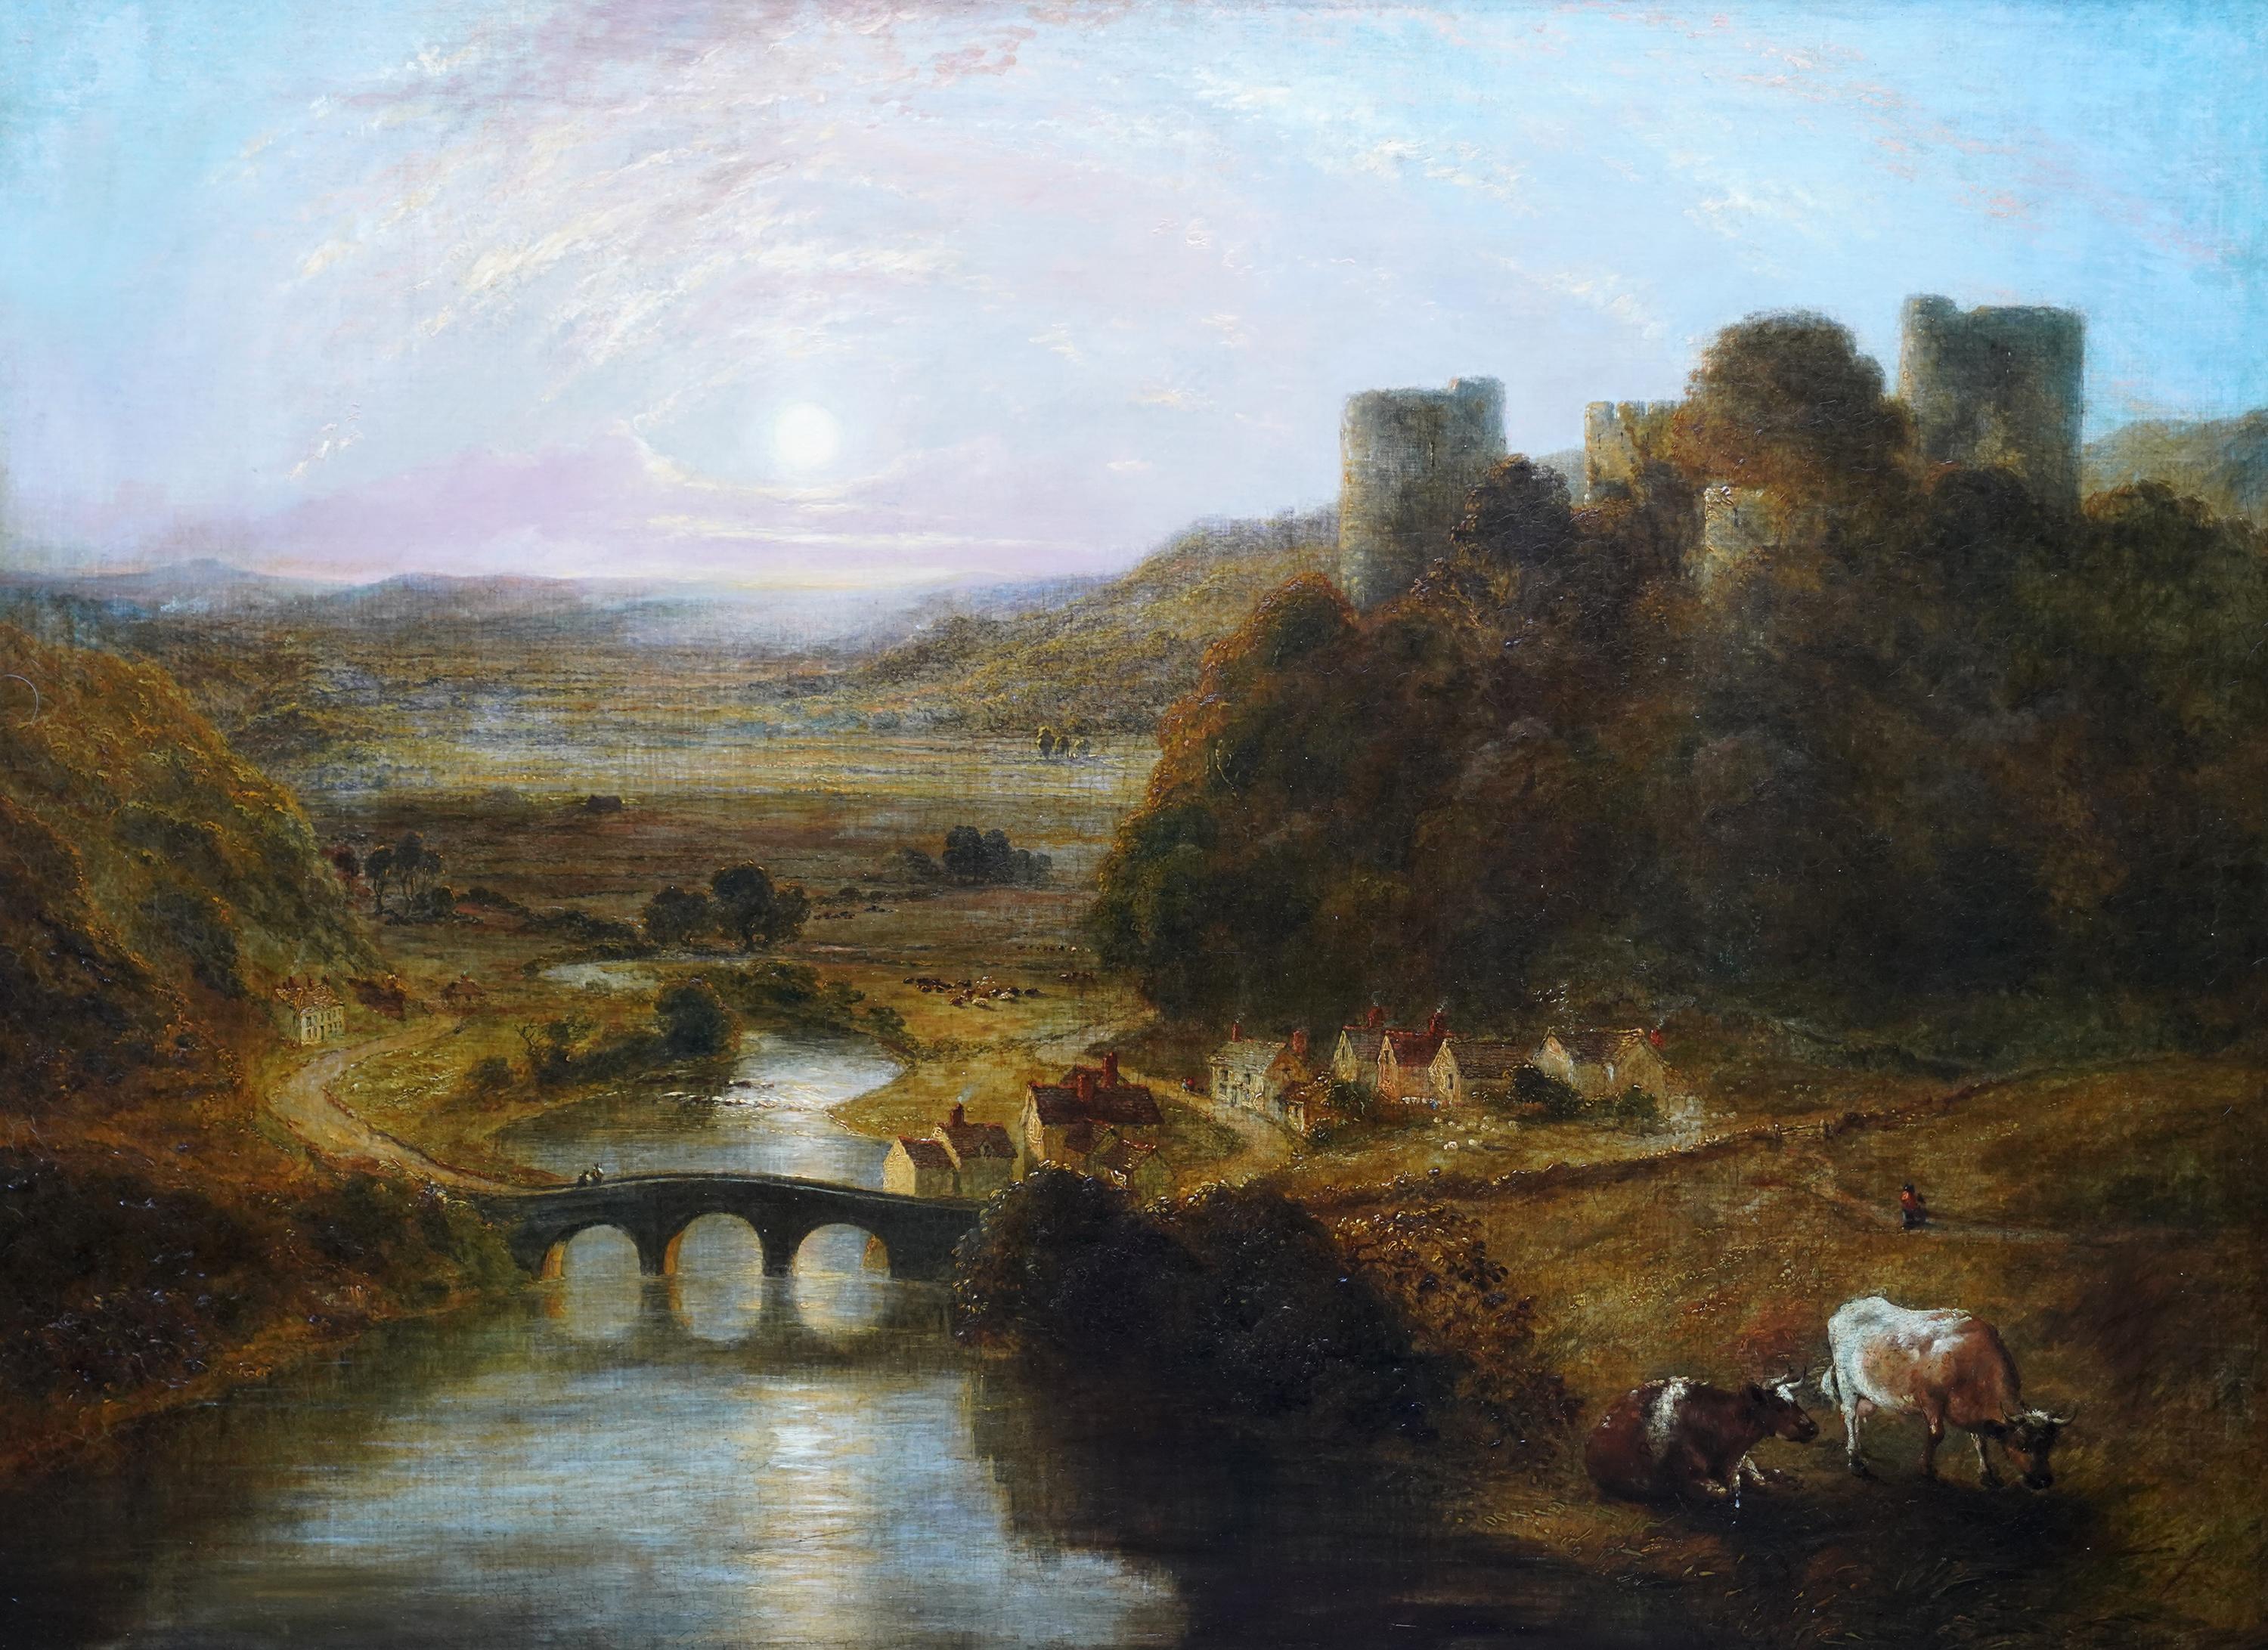 Castle and River Landscape - British 19thC art oil painting follower of Turner - Painting by George Mote